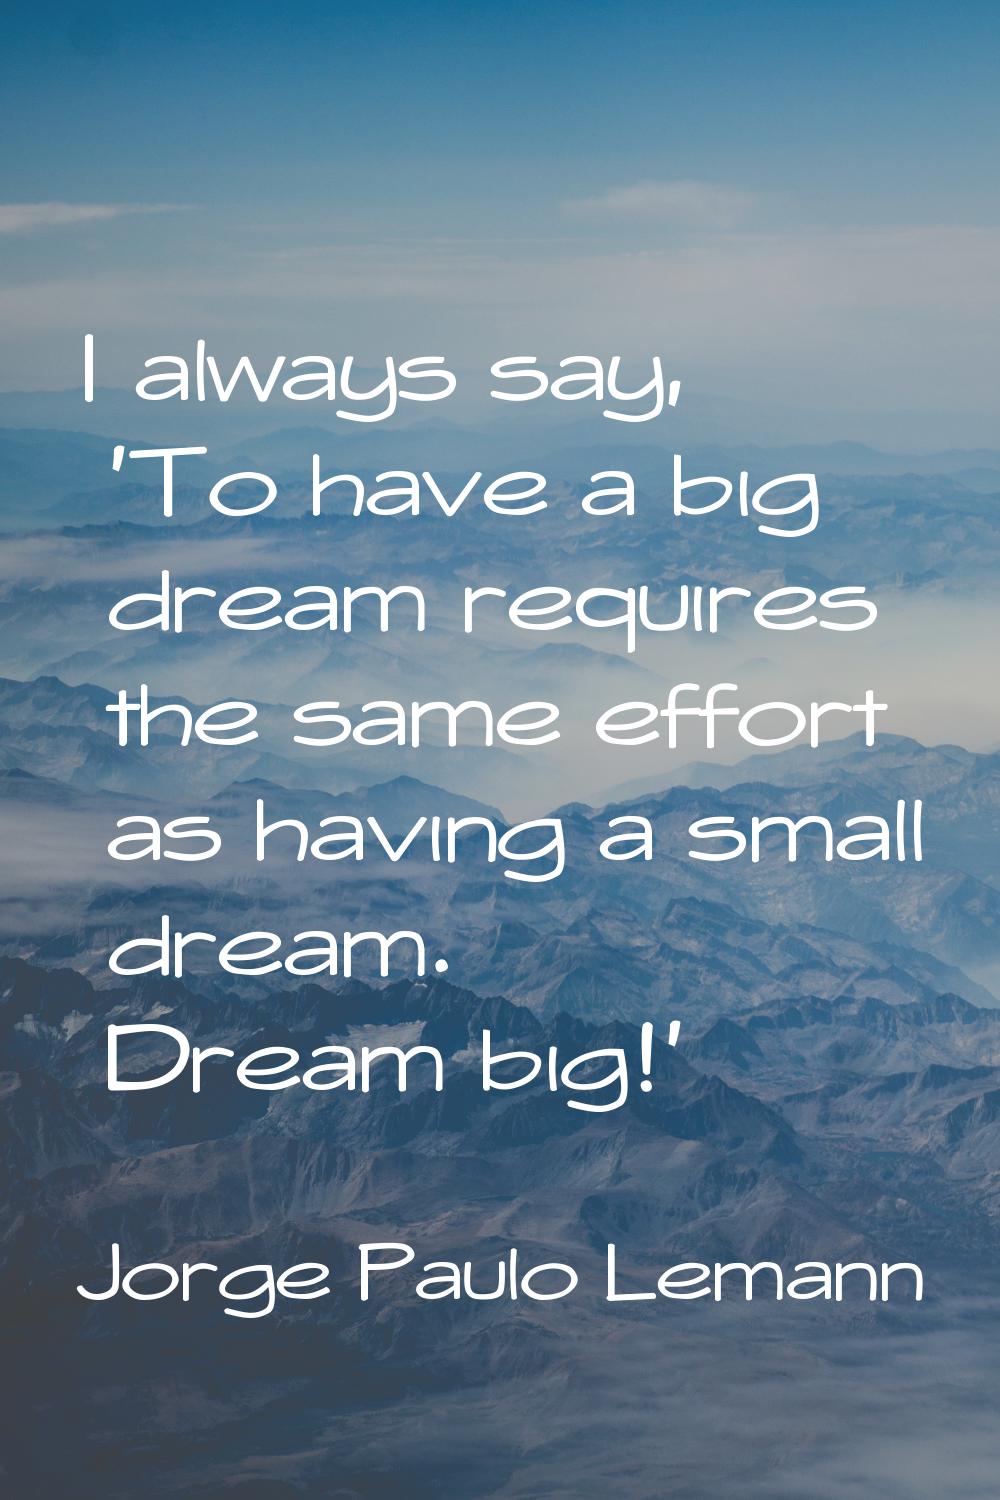 I always say, 'To have a big dream requires the same effort as having a small dream. Dream big!'